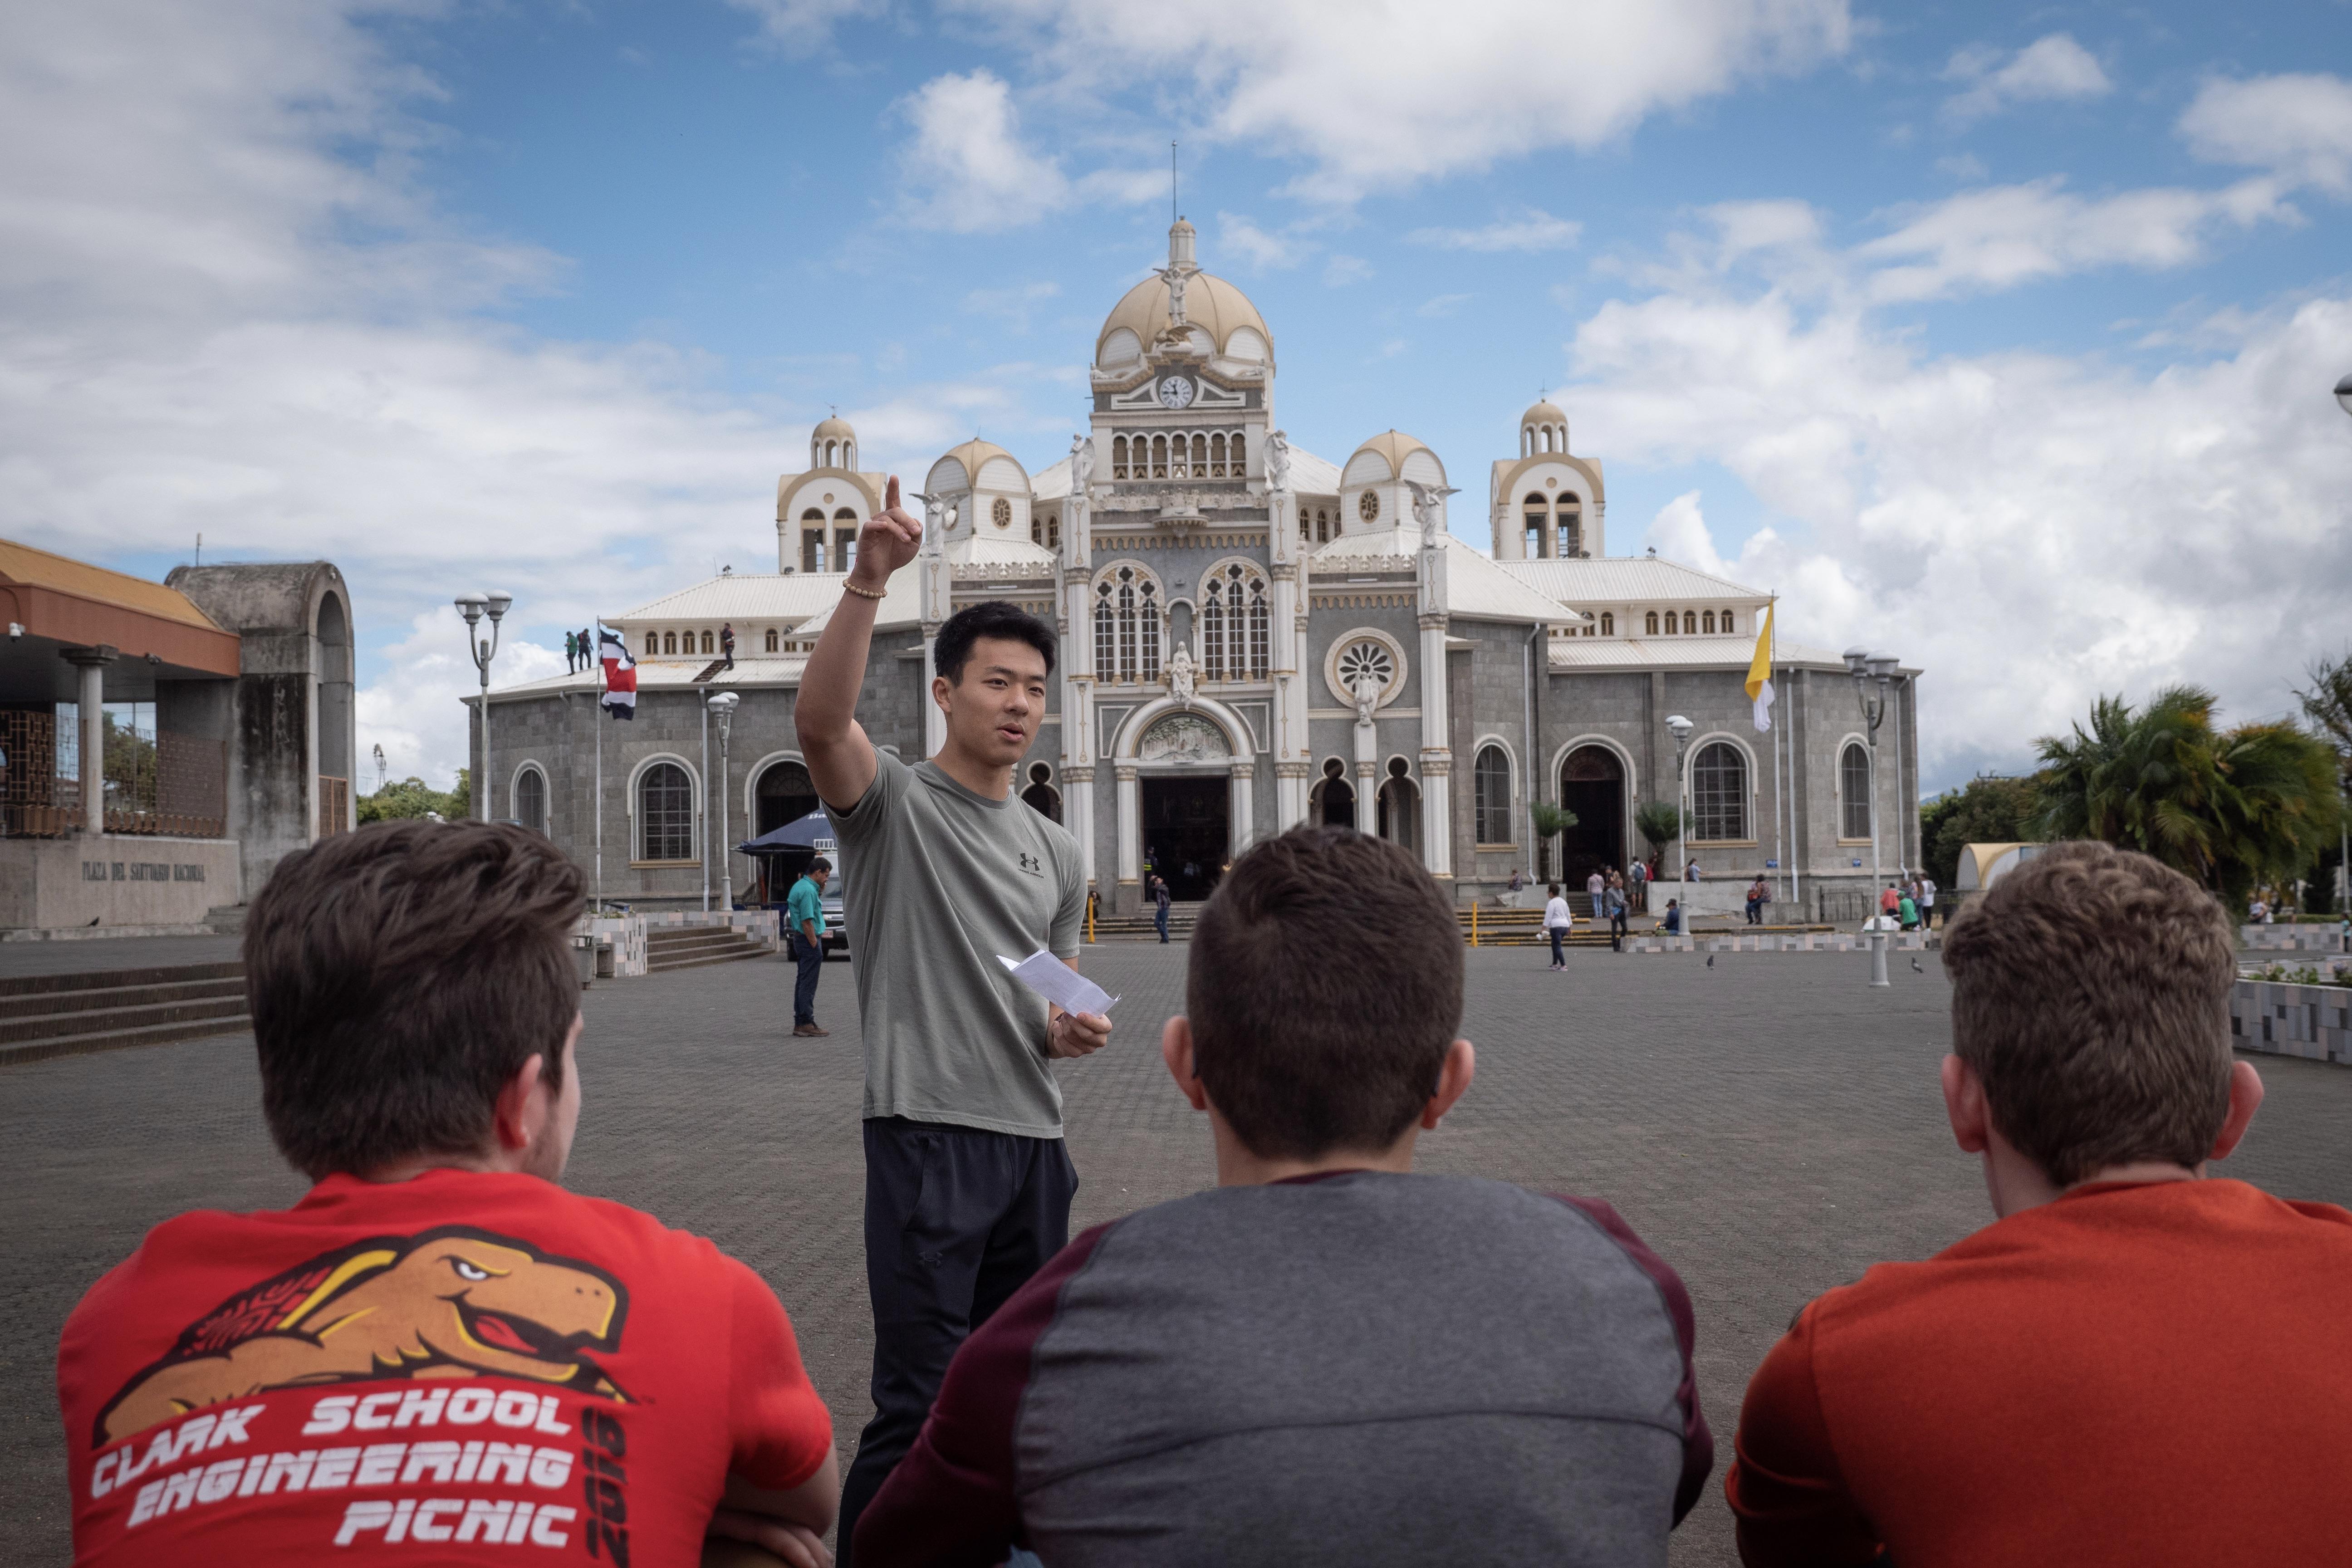 Student is giving a presentation in front of a cathedral in South America. Three other students are watching, one of whom is wearing a Clark School of Engineering t-shirt. 